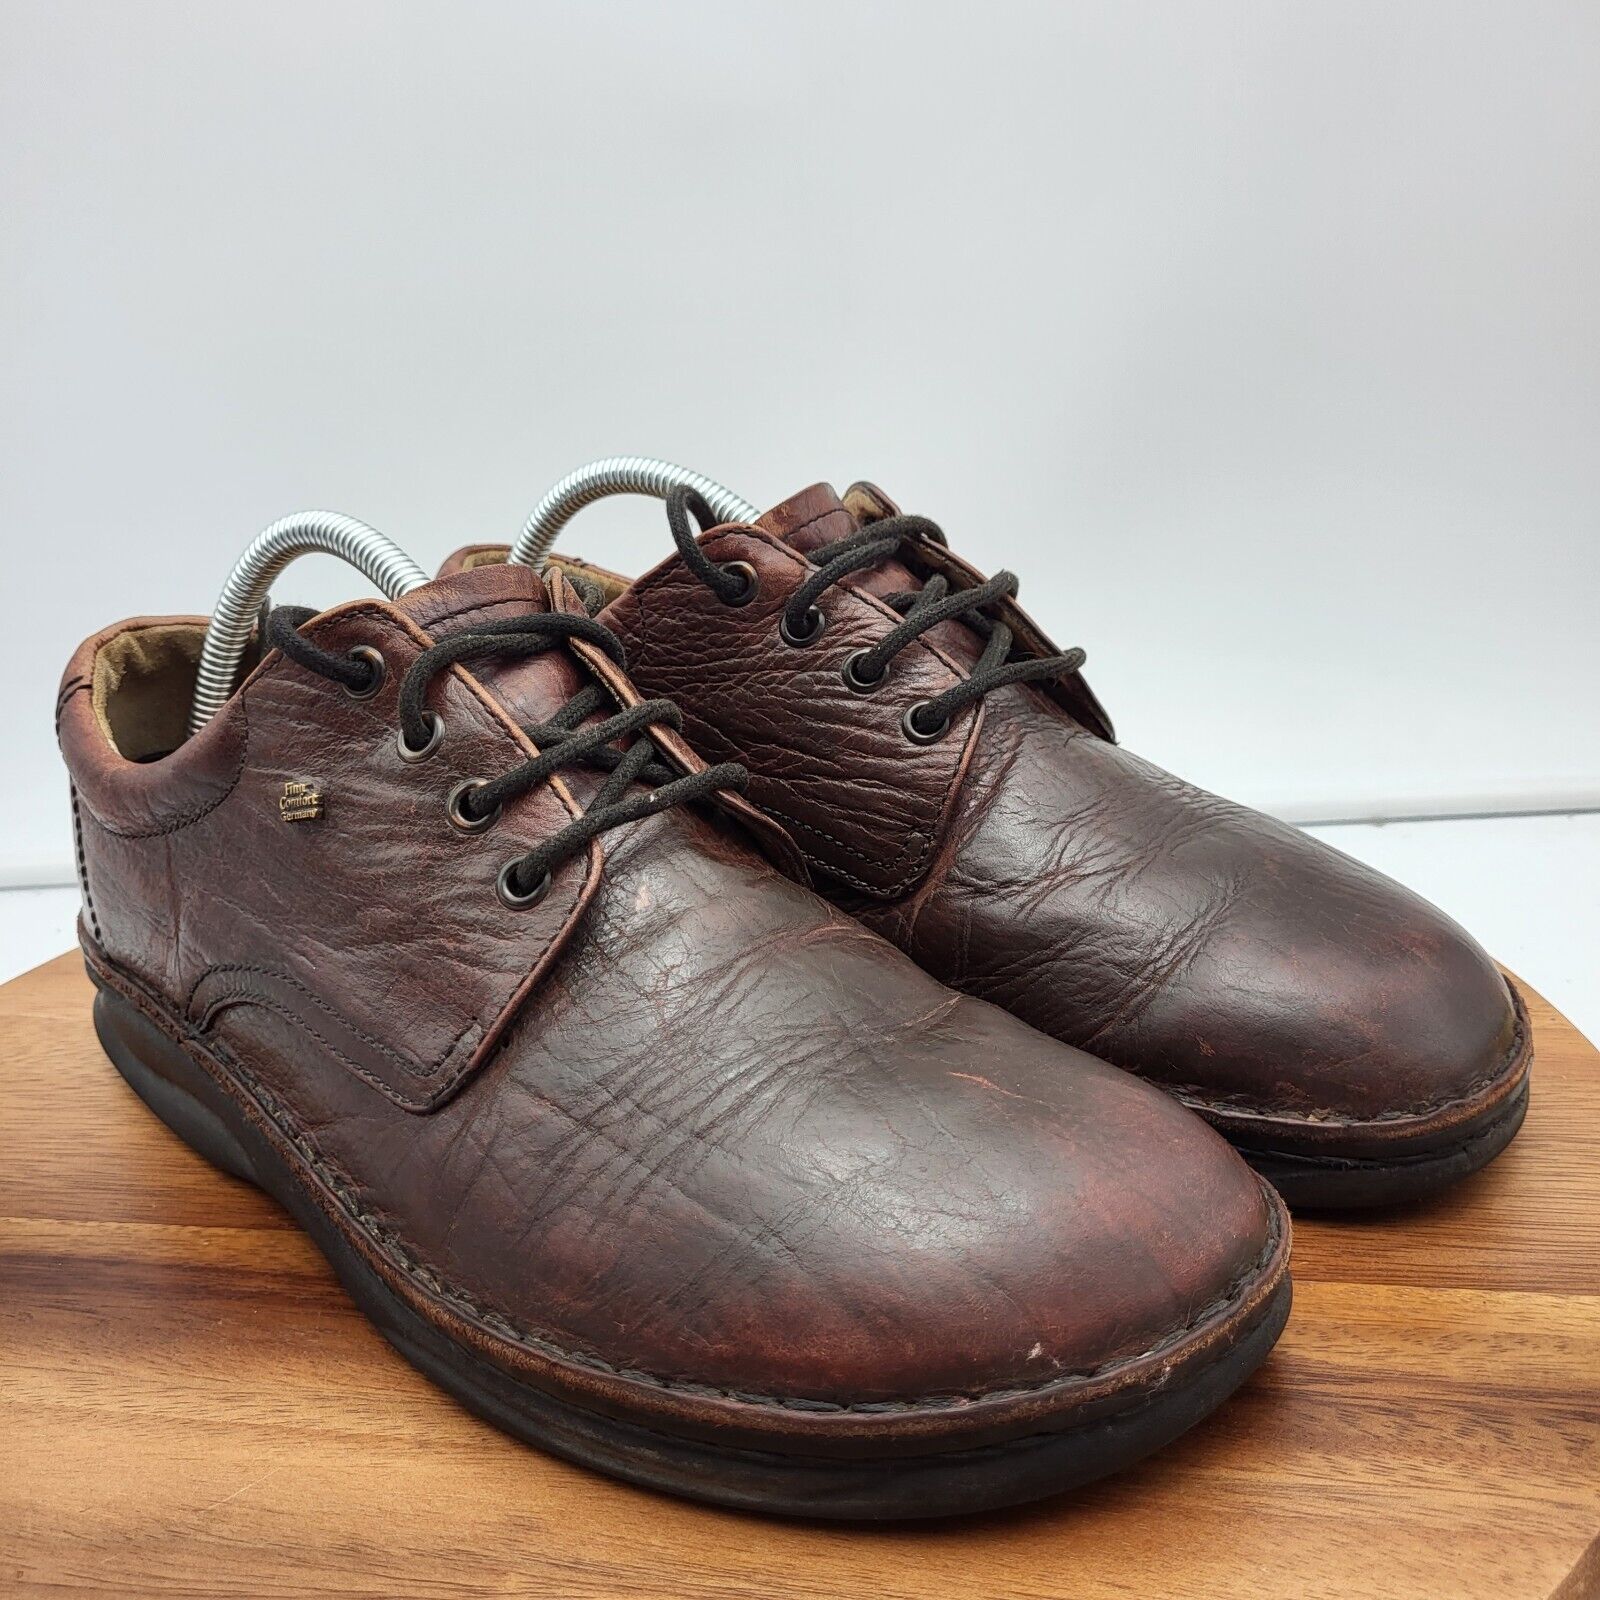 Finn Comfort Shoes Mens Size 8 Brown Leather Oxfords Germany